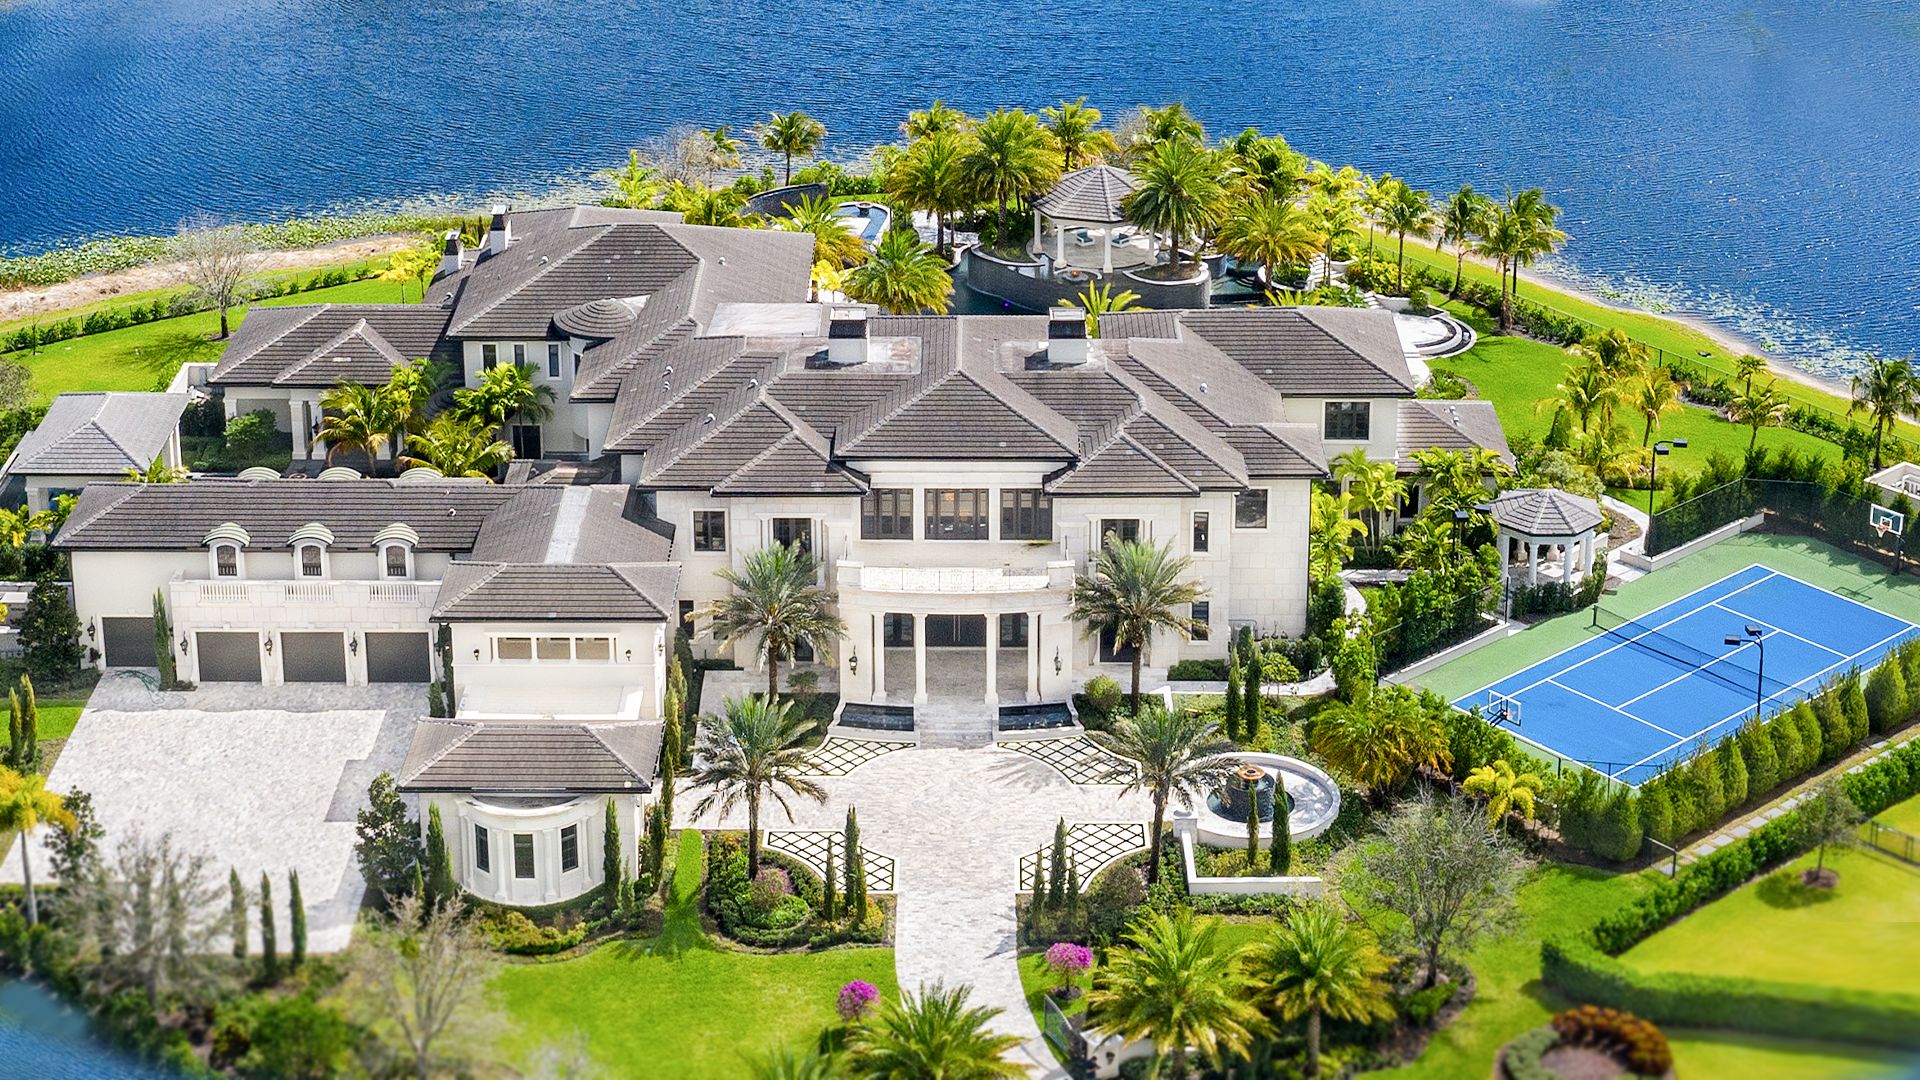 Watch Inside A $23,000,000 Mega-Mansion On An Island | On the Market | Architectural Digest